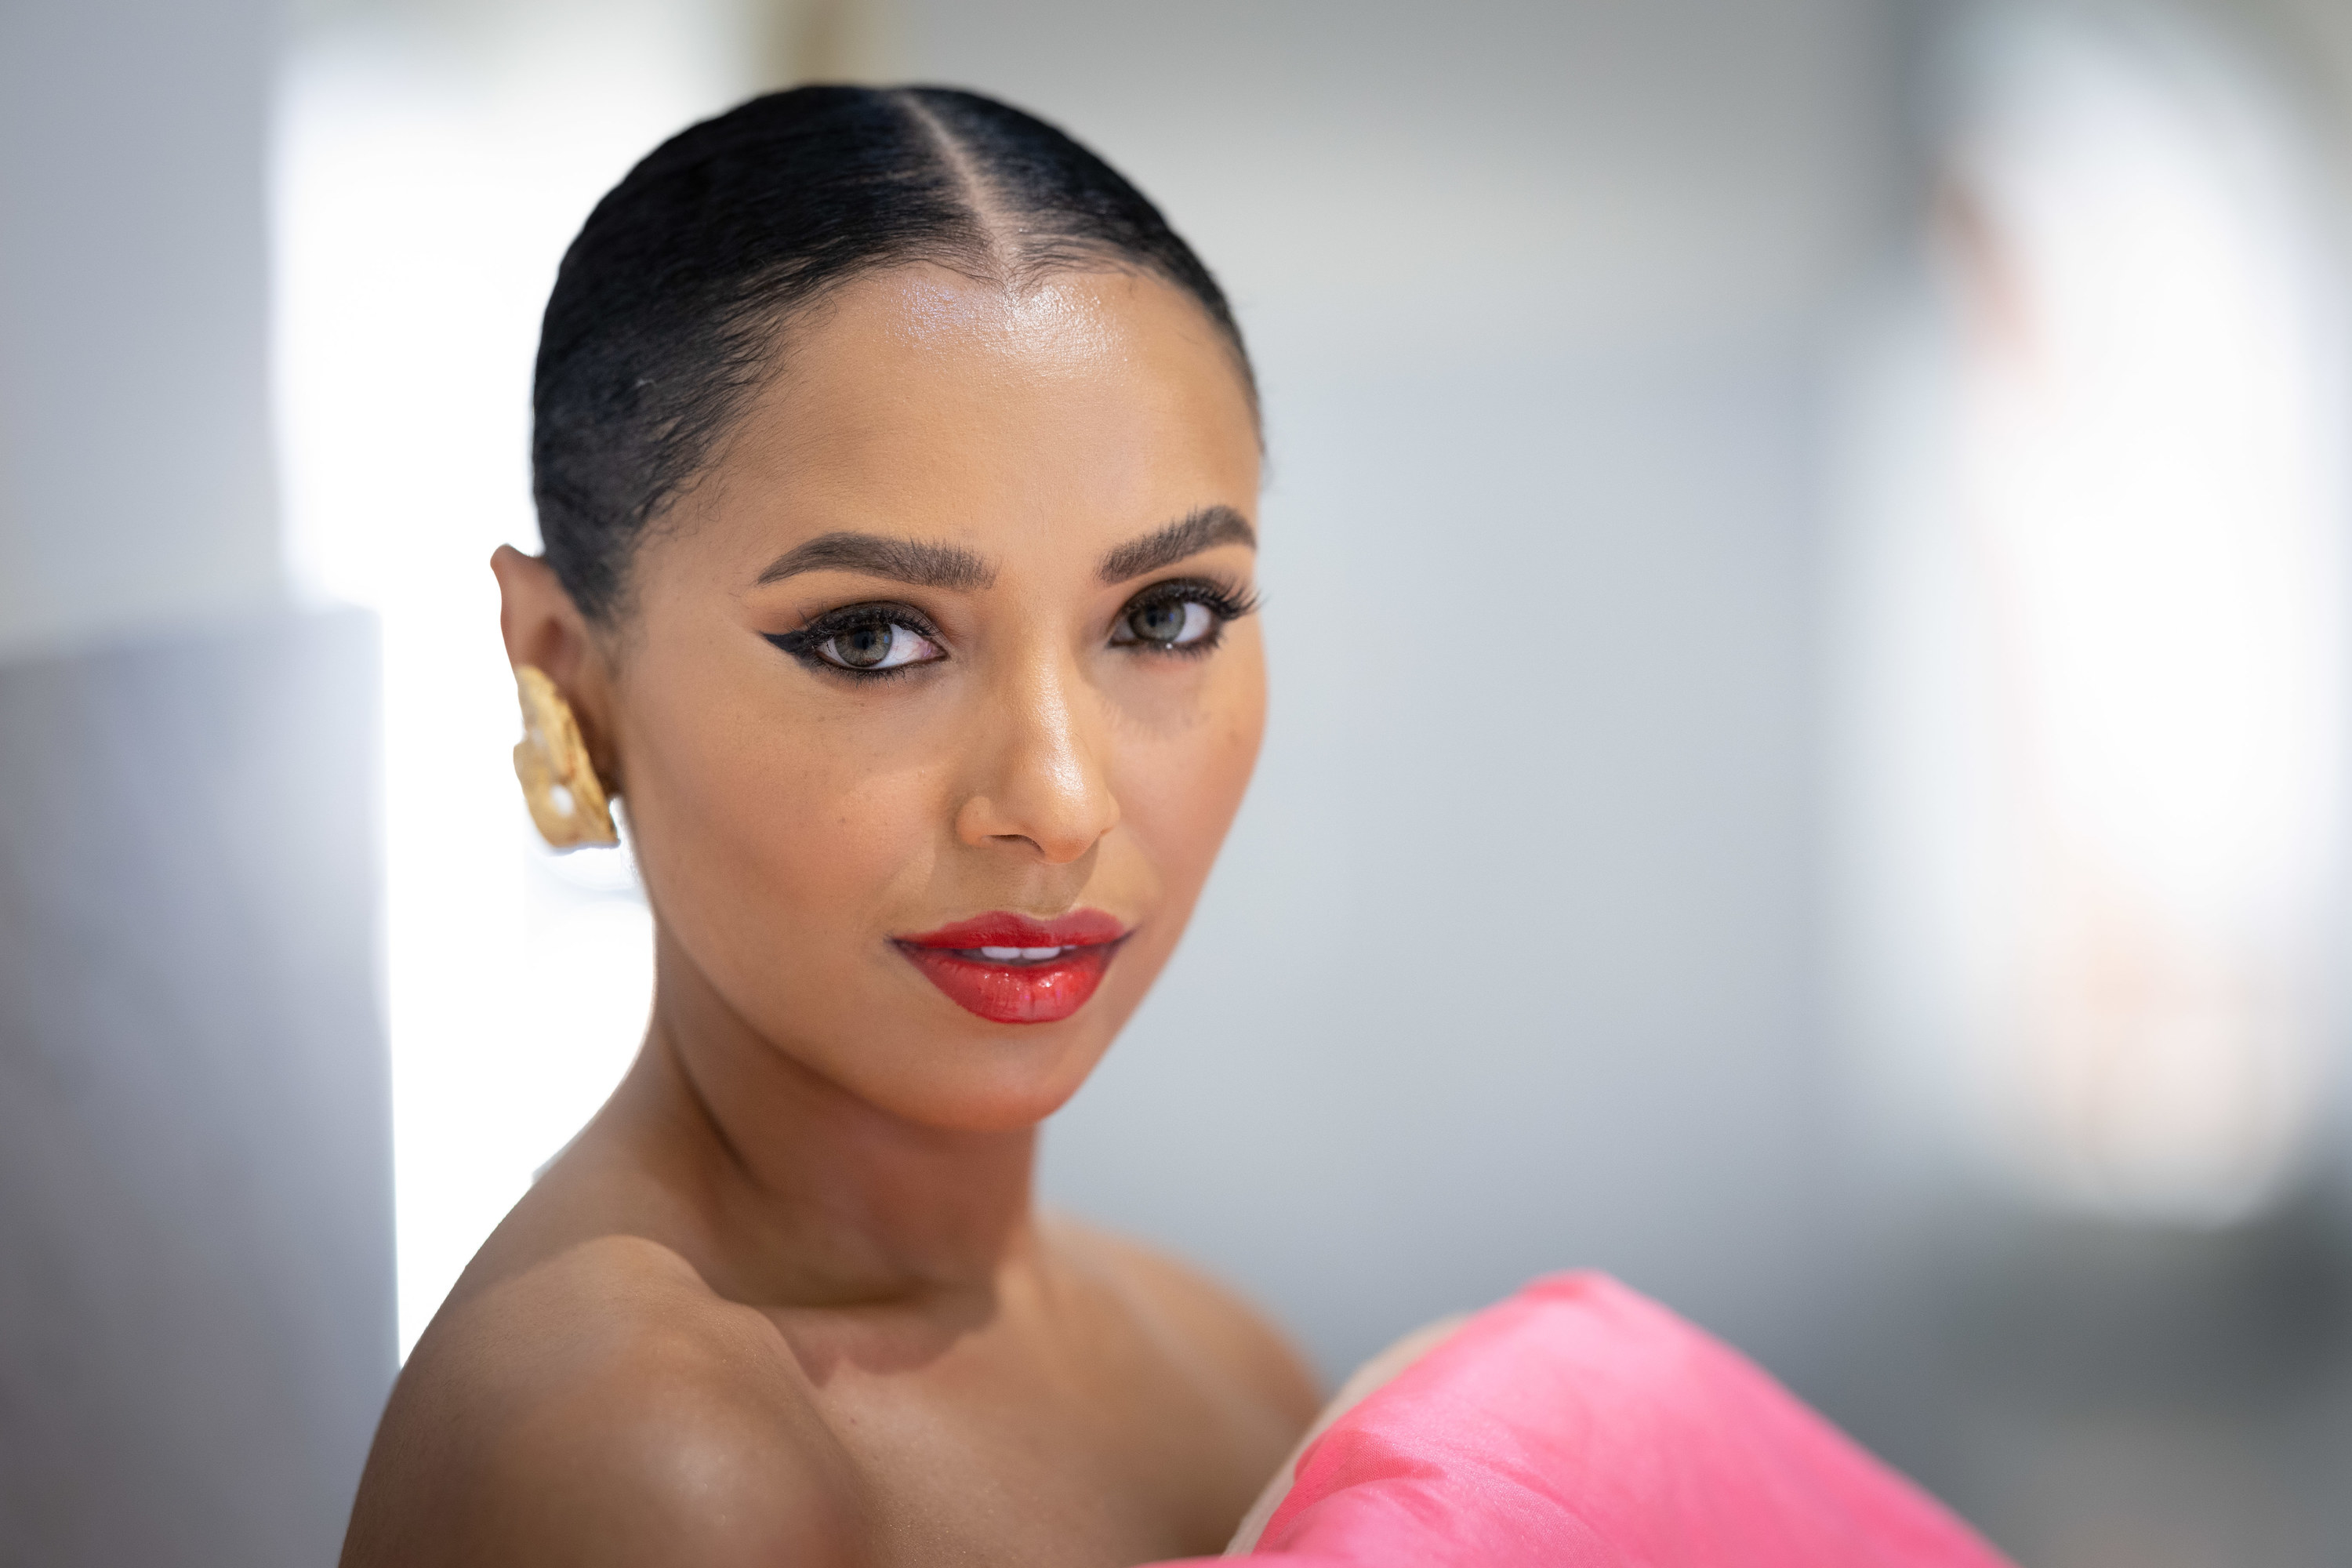 Kat Graham is photographed during the Cannes film festival on May 17, 2022